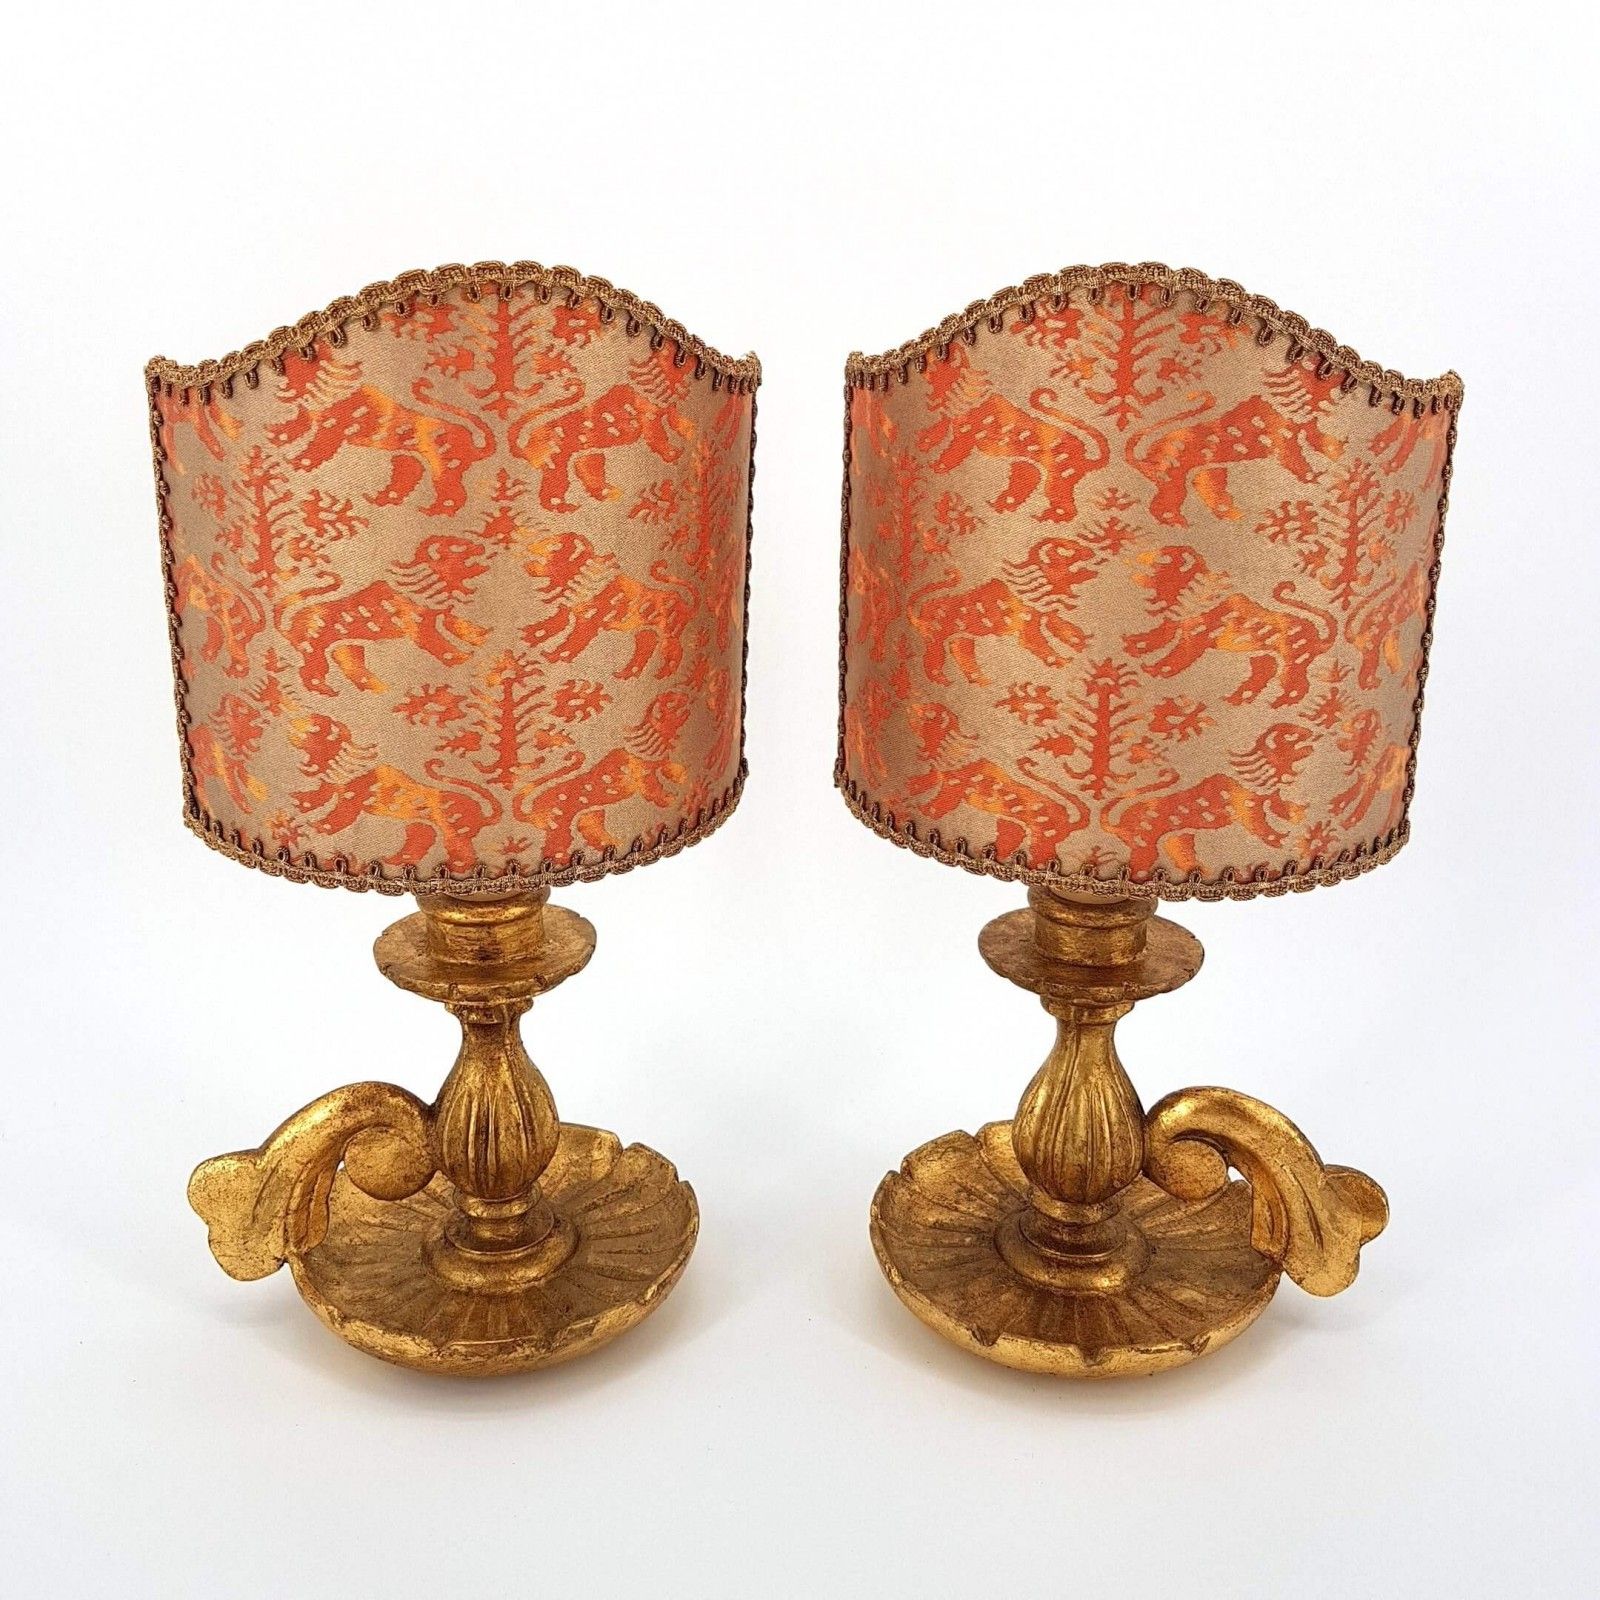 Pair Of Antique Italian Gilt Carved Wood Candlestick Table Lamps Intended For Carved Pattern Floor Lamps (View 13 of 15)